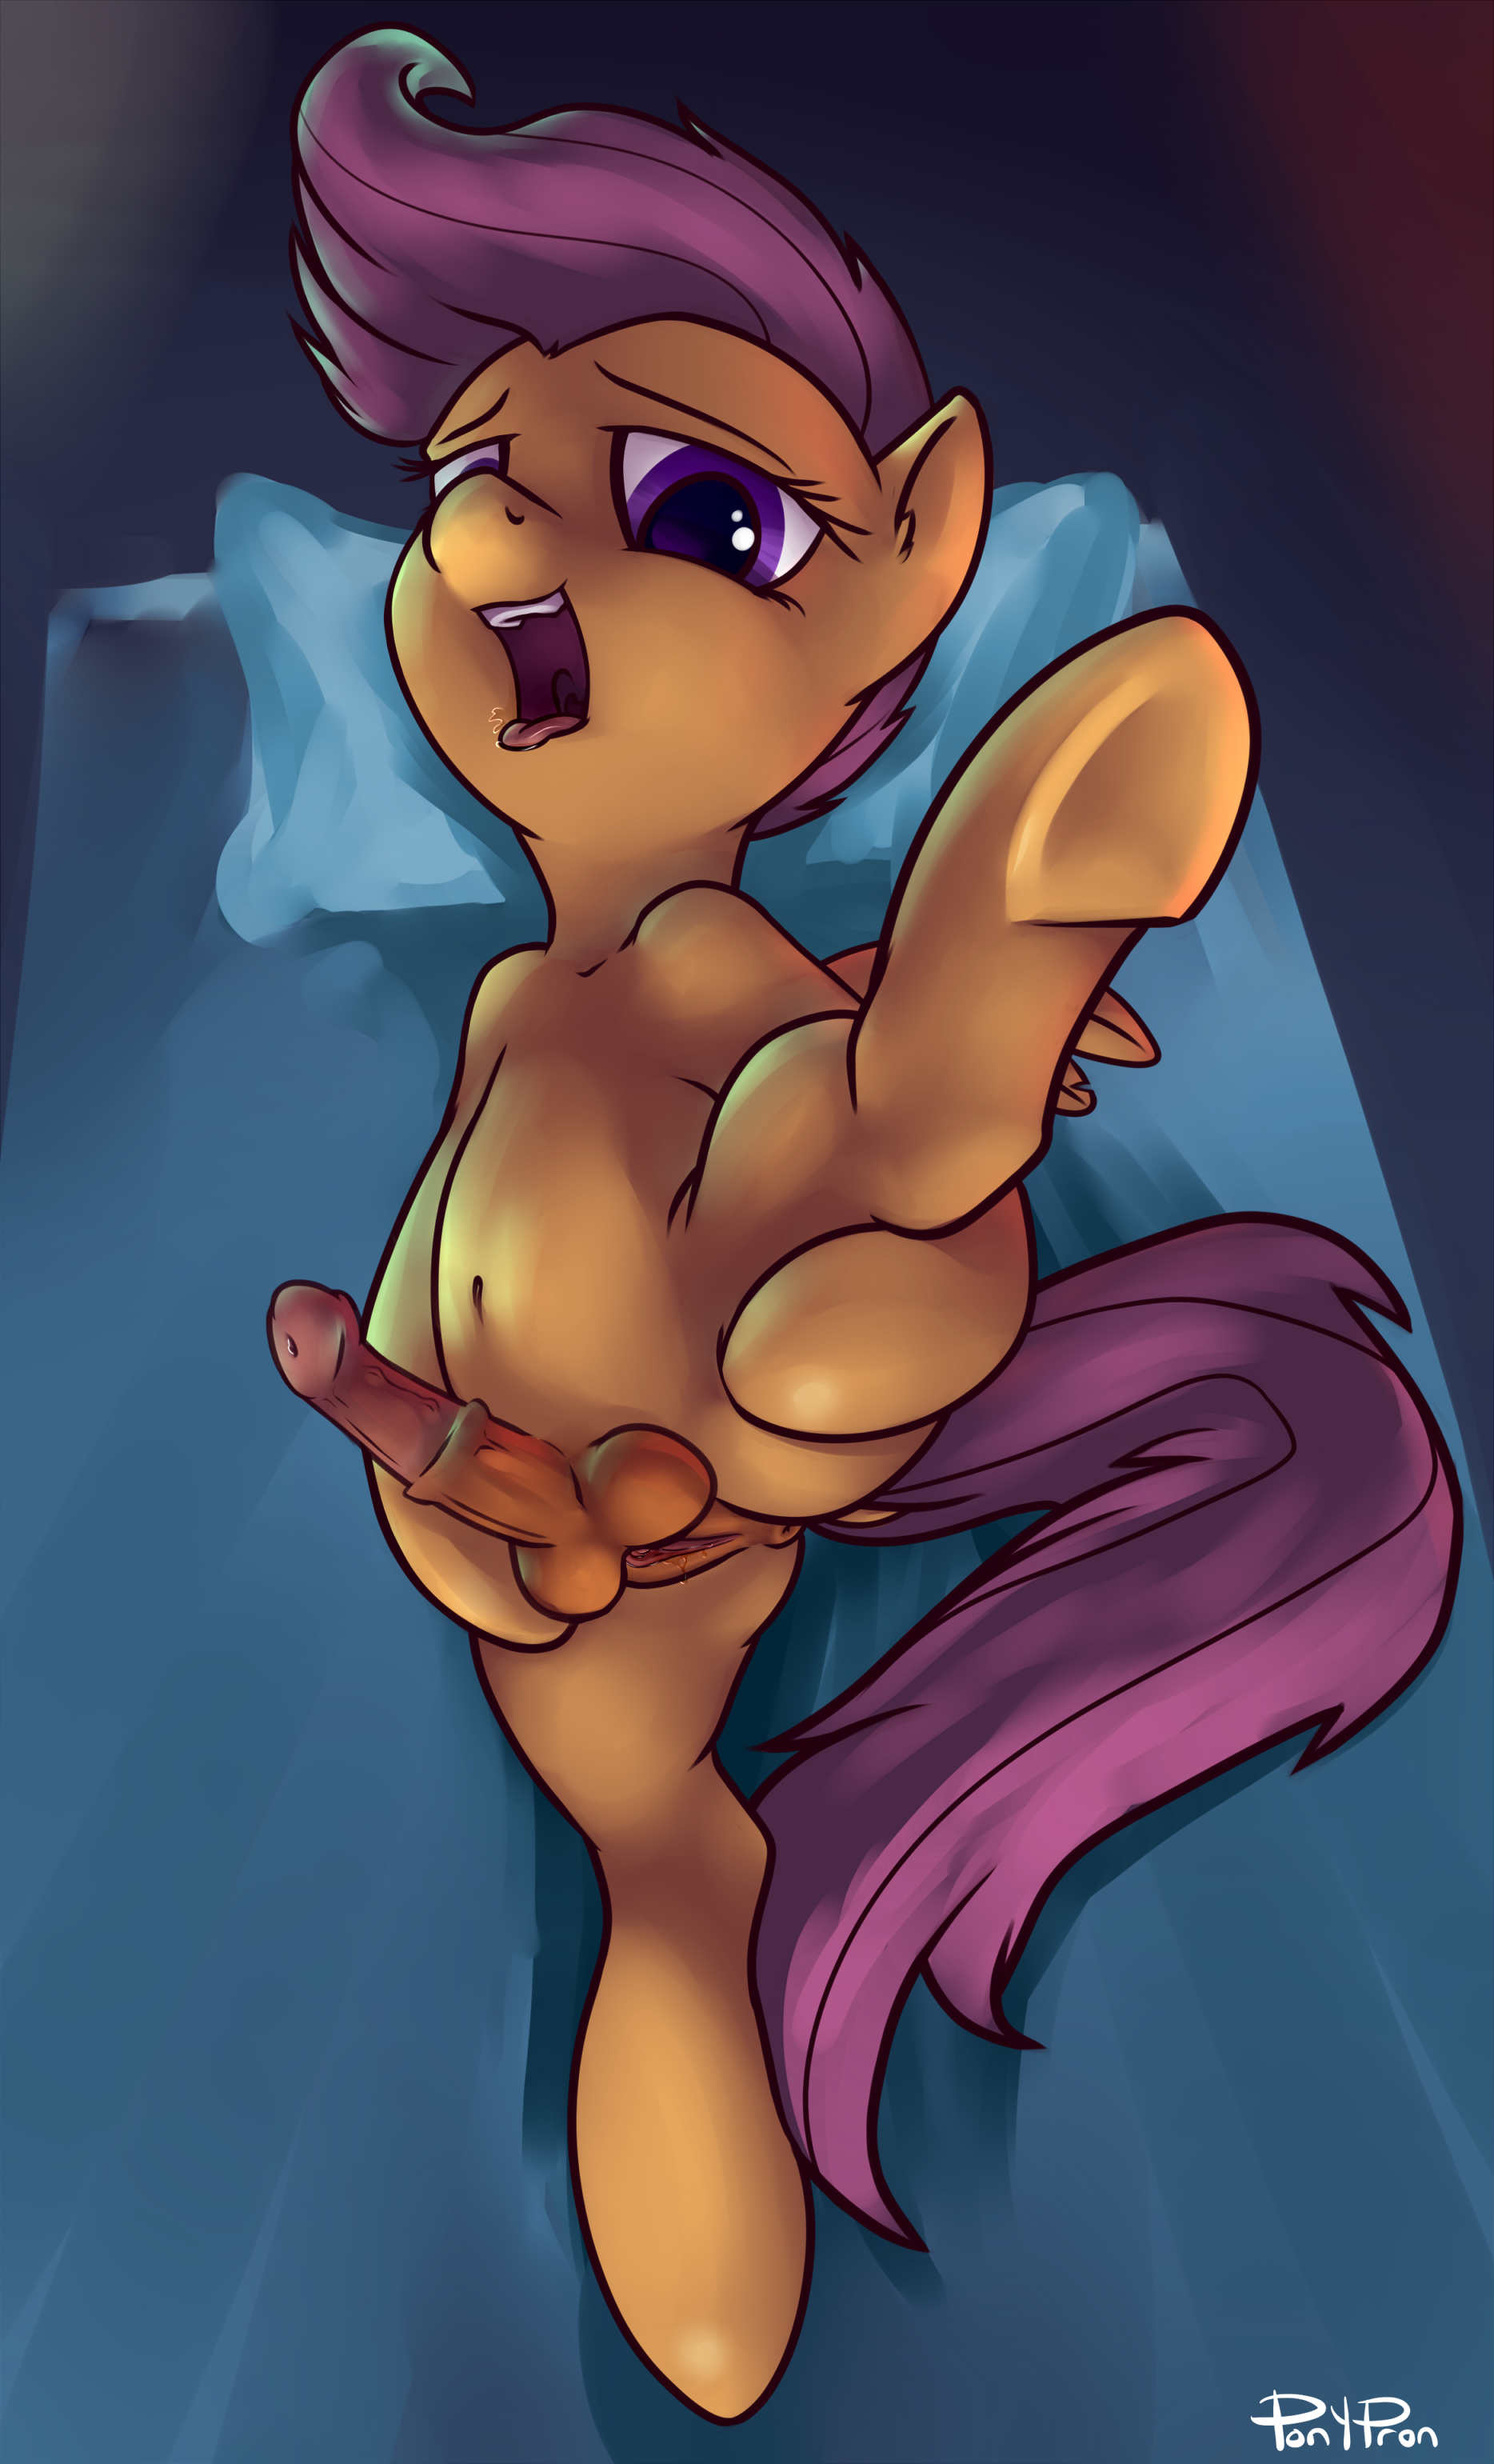 Another Scootaloo